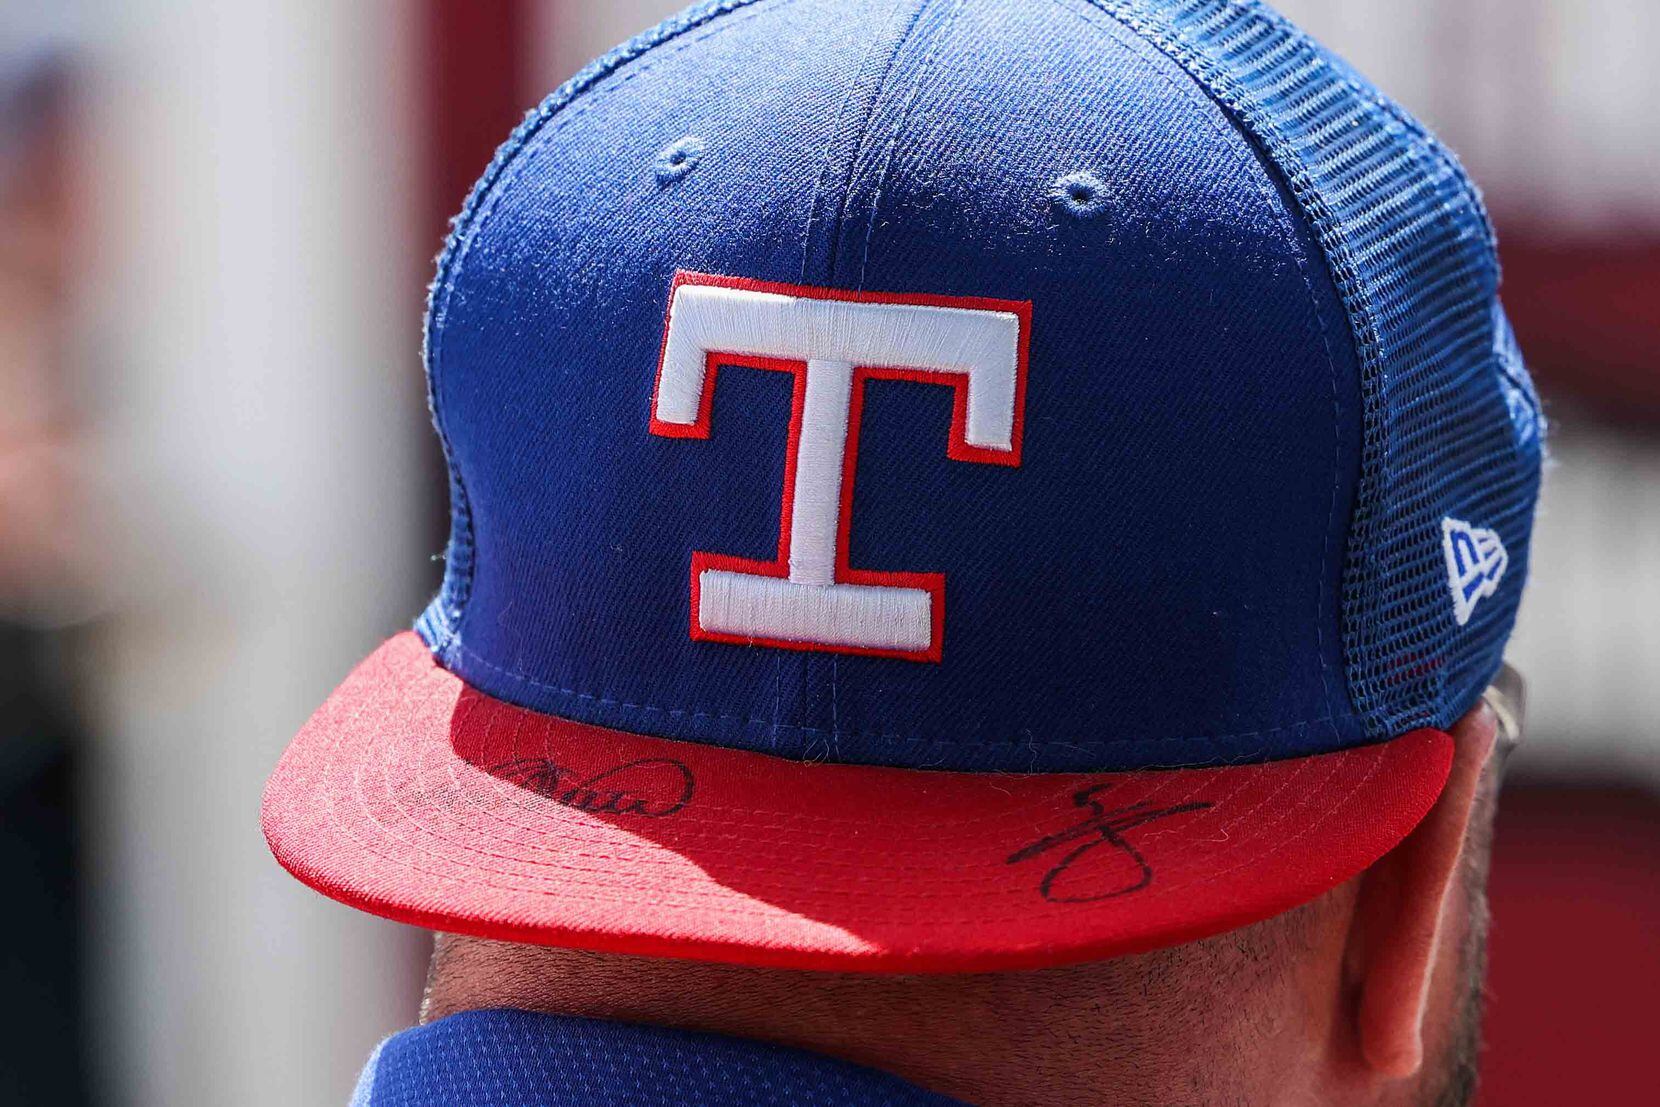 A fan wears a Texas Rangers hat before the game between Texas Rangers and Toronto Blue Jays on opening day outside the Globe Life Field in Arlington, Texas on Monday, April 5, 2021. (Lola Gomez/The Dallas Morning News)